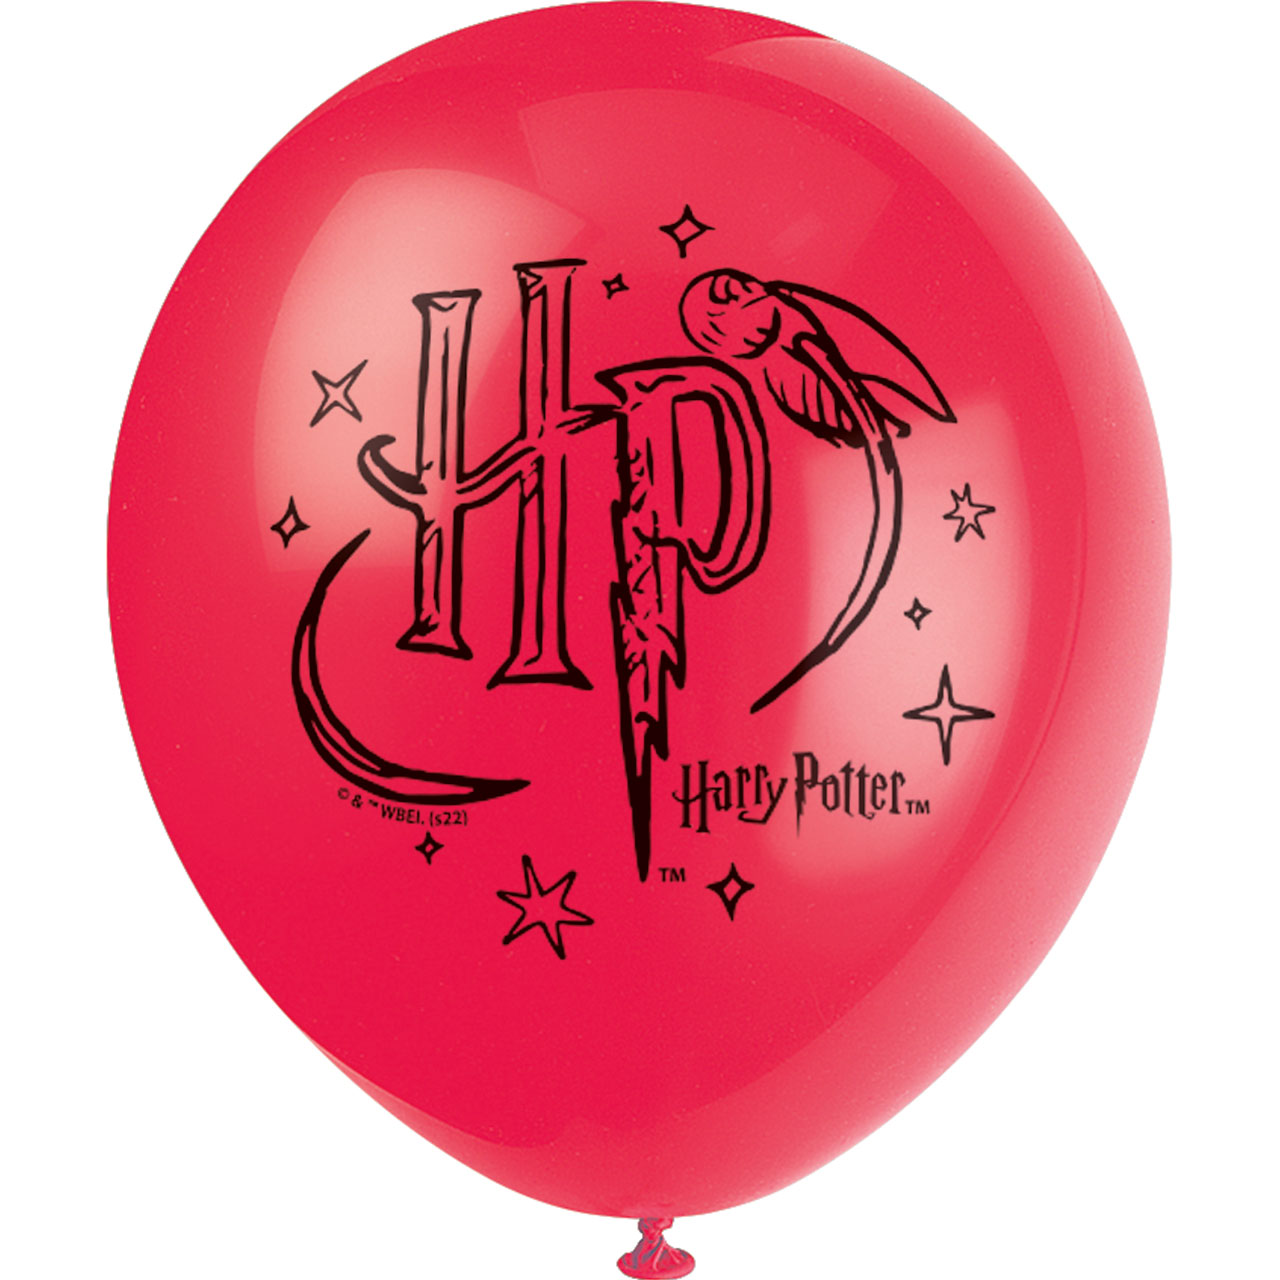 8 Ballons Harry Potter Party